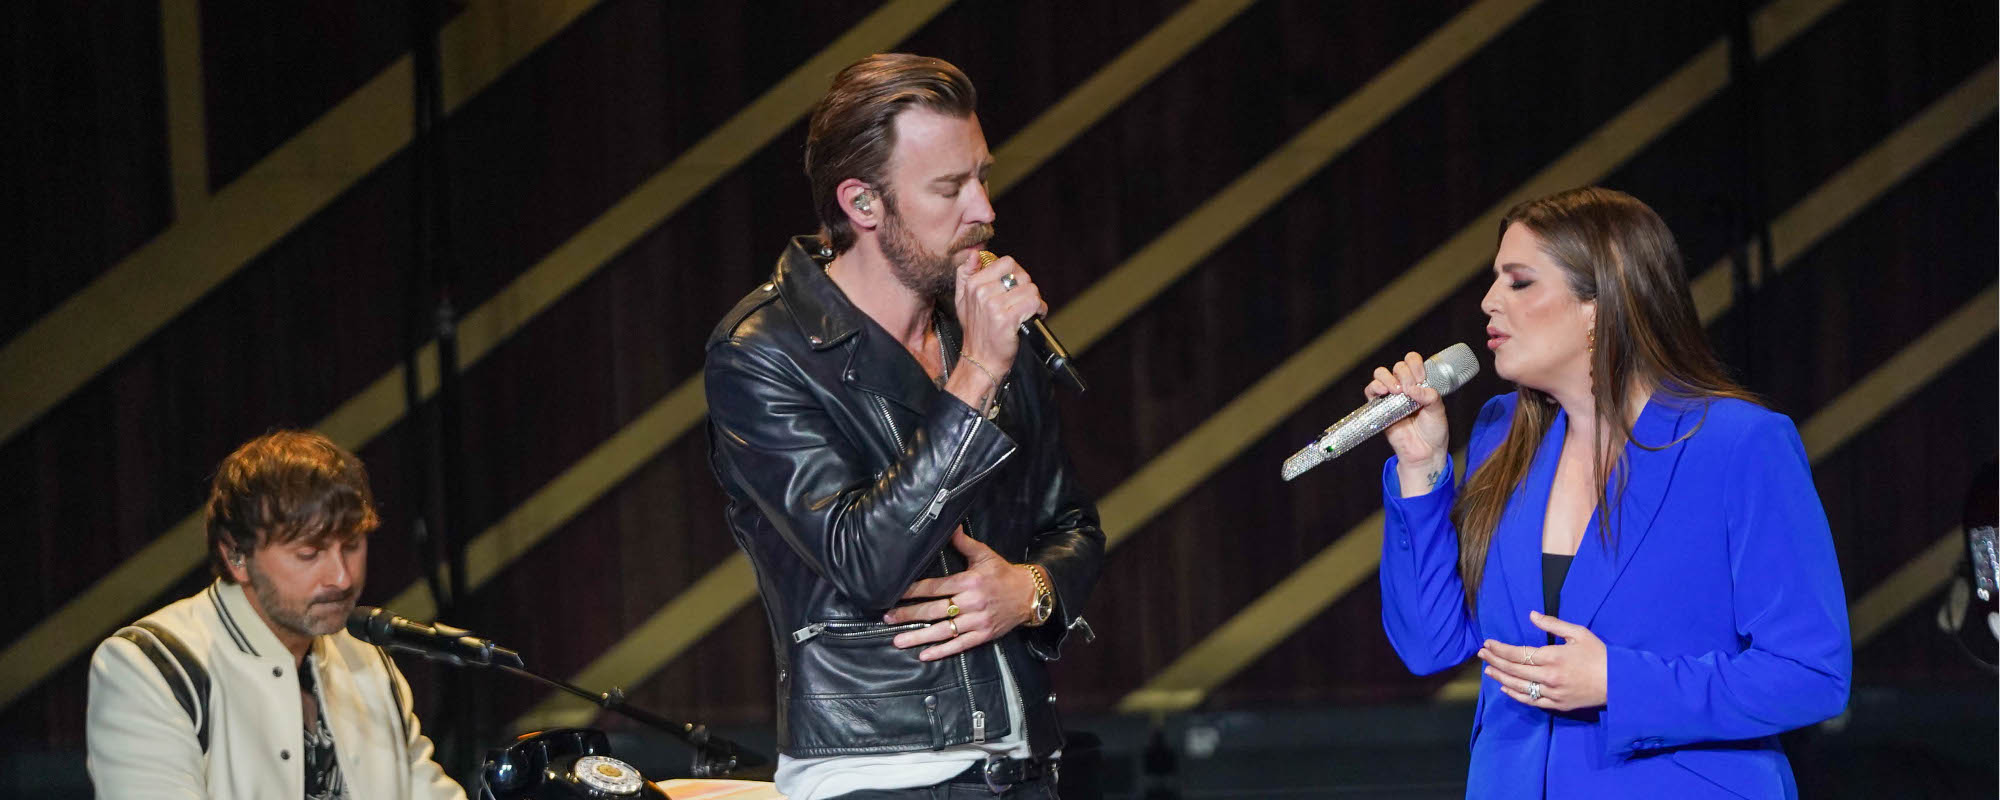 Lady A’s Charles Kelley Gets Standing Ovation with Goodbye Letter to Alcohol “As Far As You Could” at Tour Kickoff